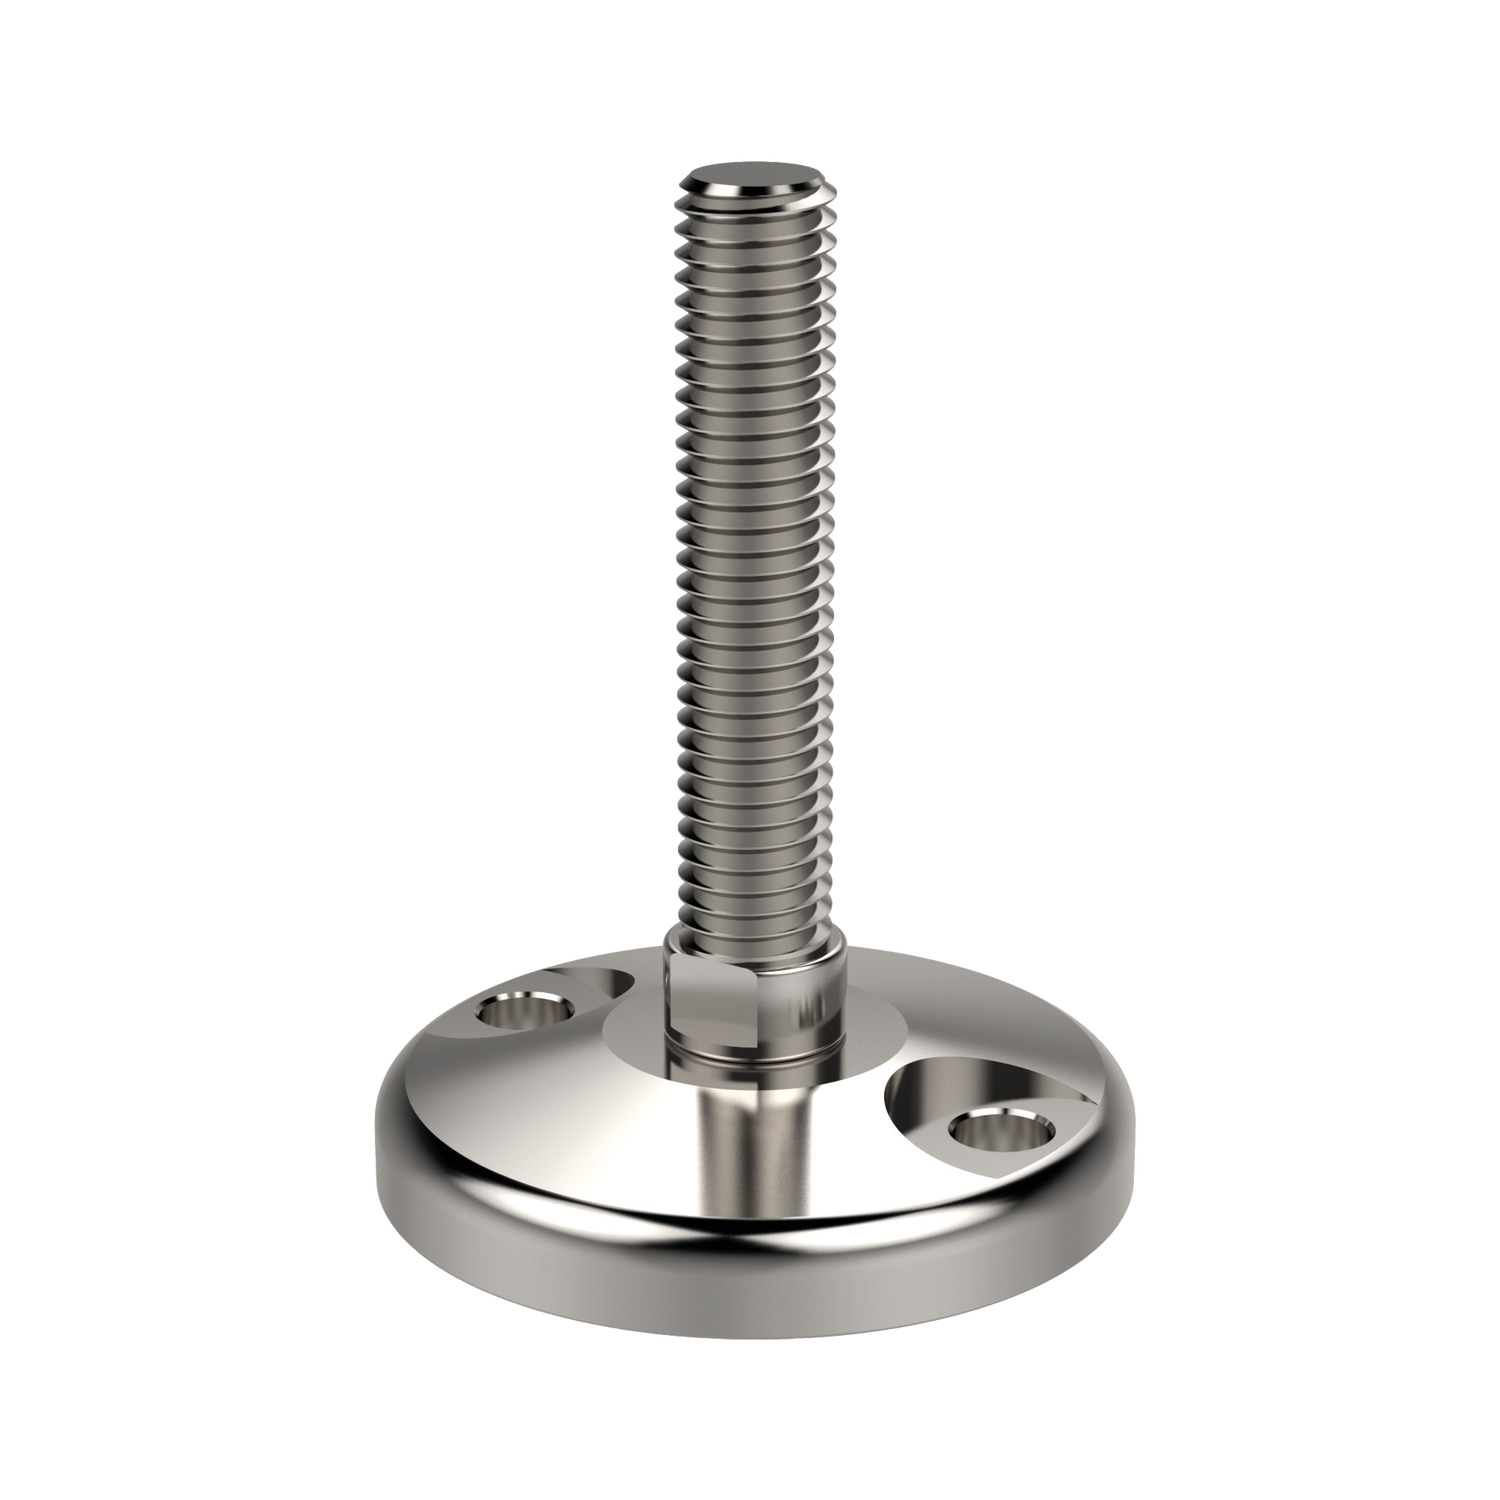 Levelling Feet - Bolt Down Heavy duty, fully stainless steel (AISI 304, AISI 316 on request) bolt down levelling feet for medium loads. Due to to dealing with heavy loads the thread bolt does not articulate.